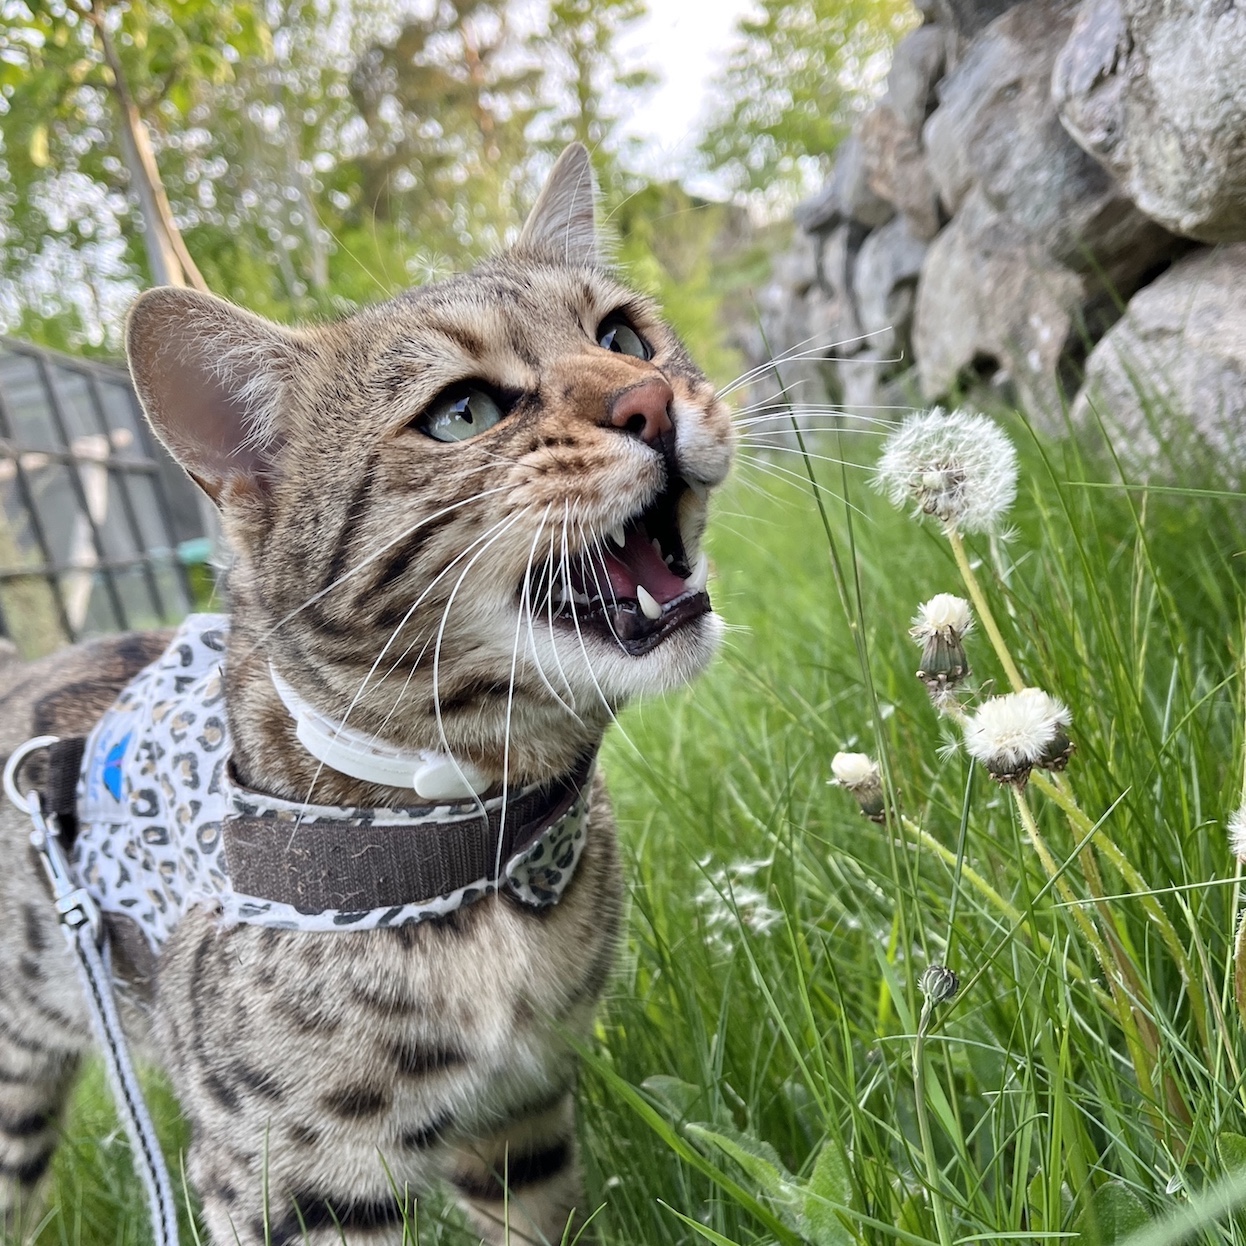 Black spotted bengal roaring in the garden